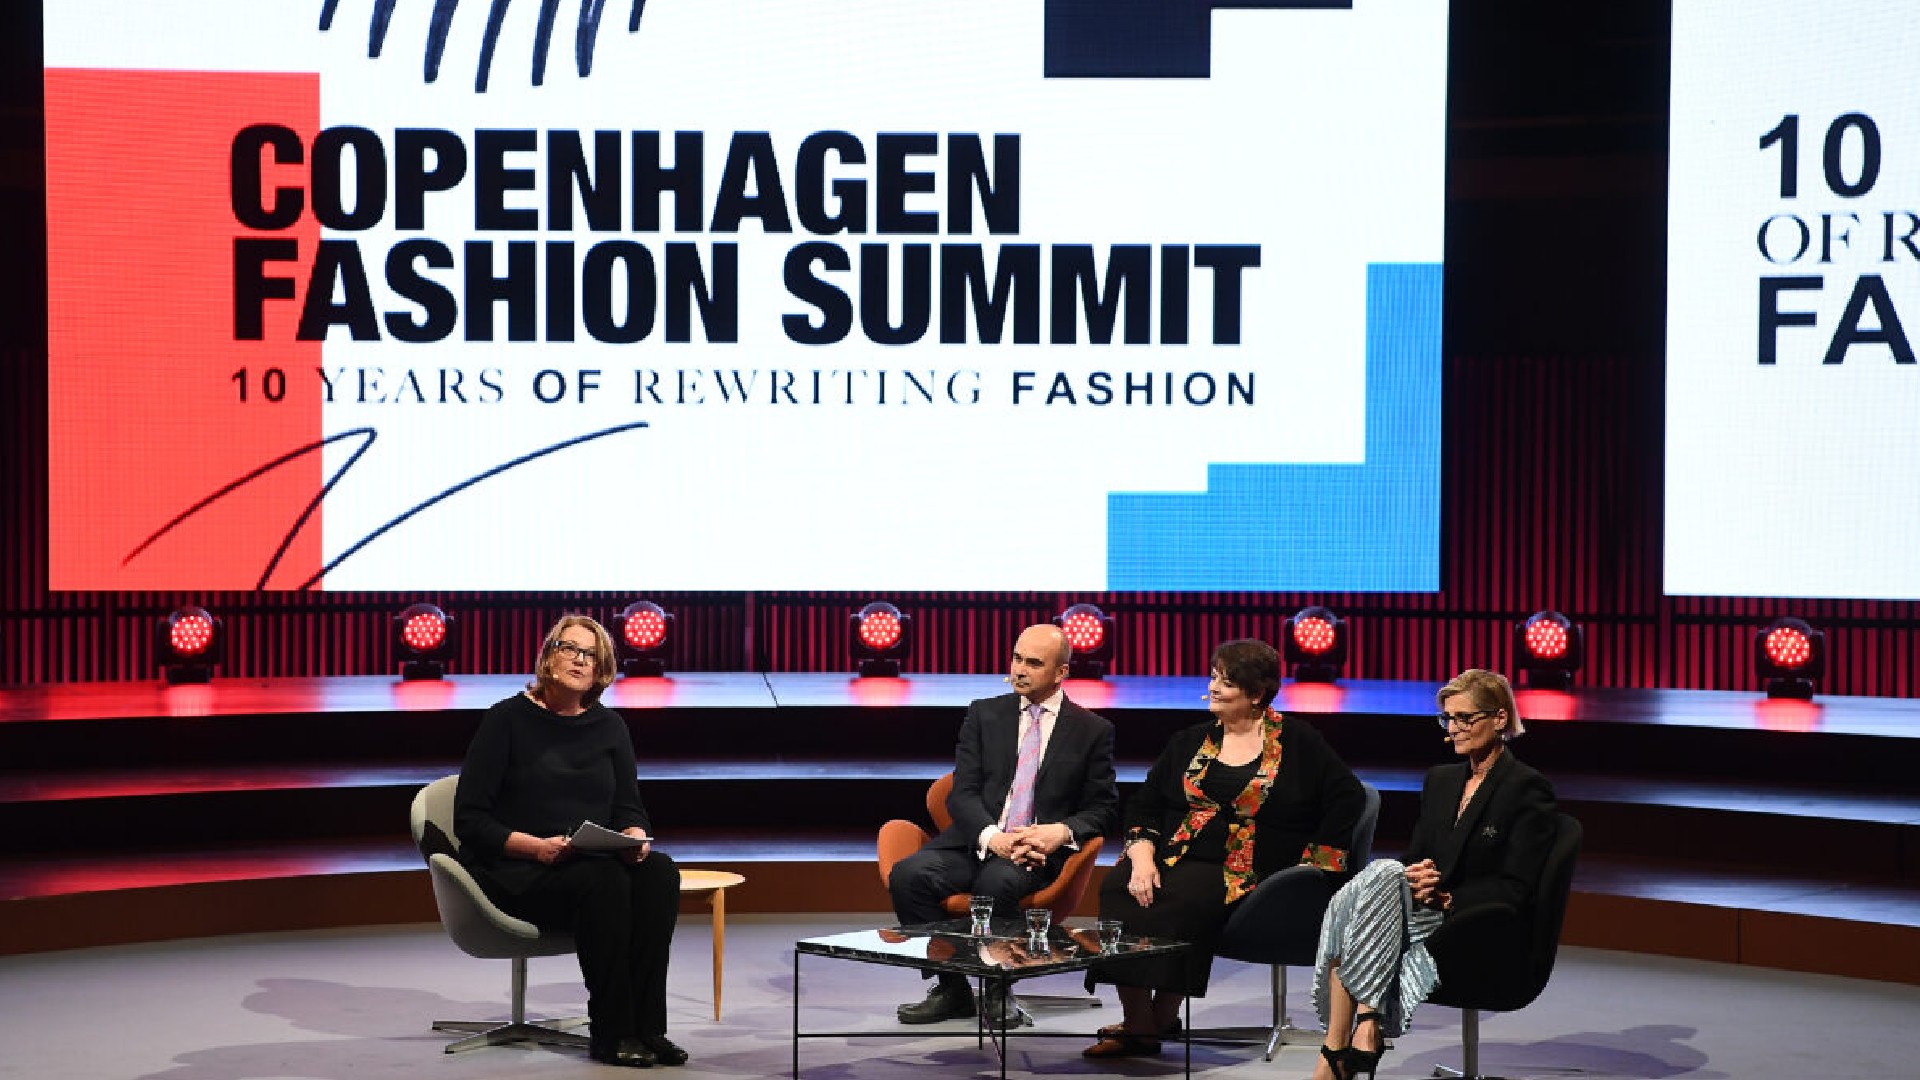 The Copenhagen Fashion Summit 2020 Emphasized Redesigning Value In The Fashion Industry.